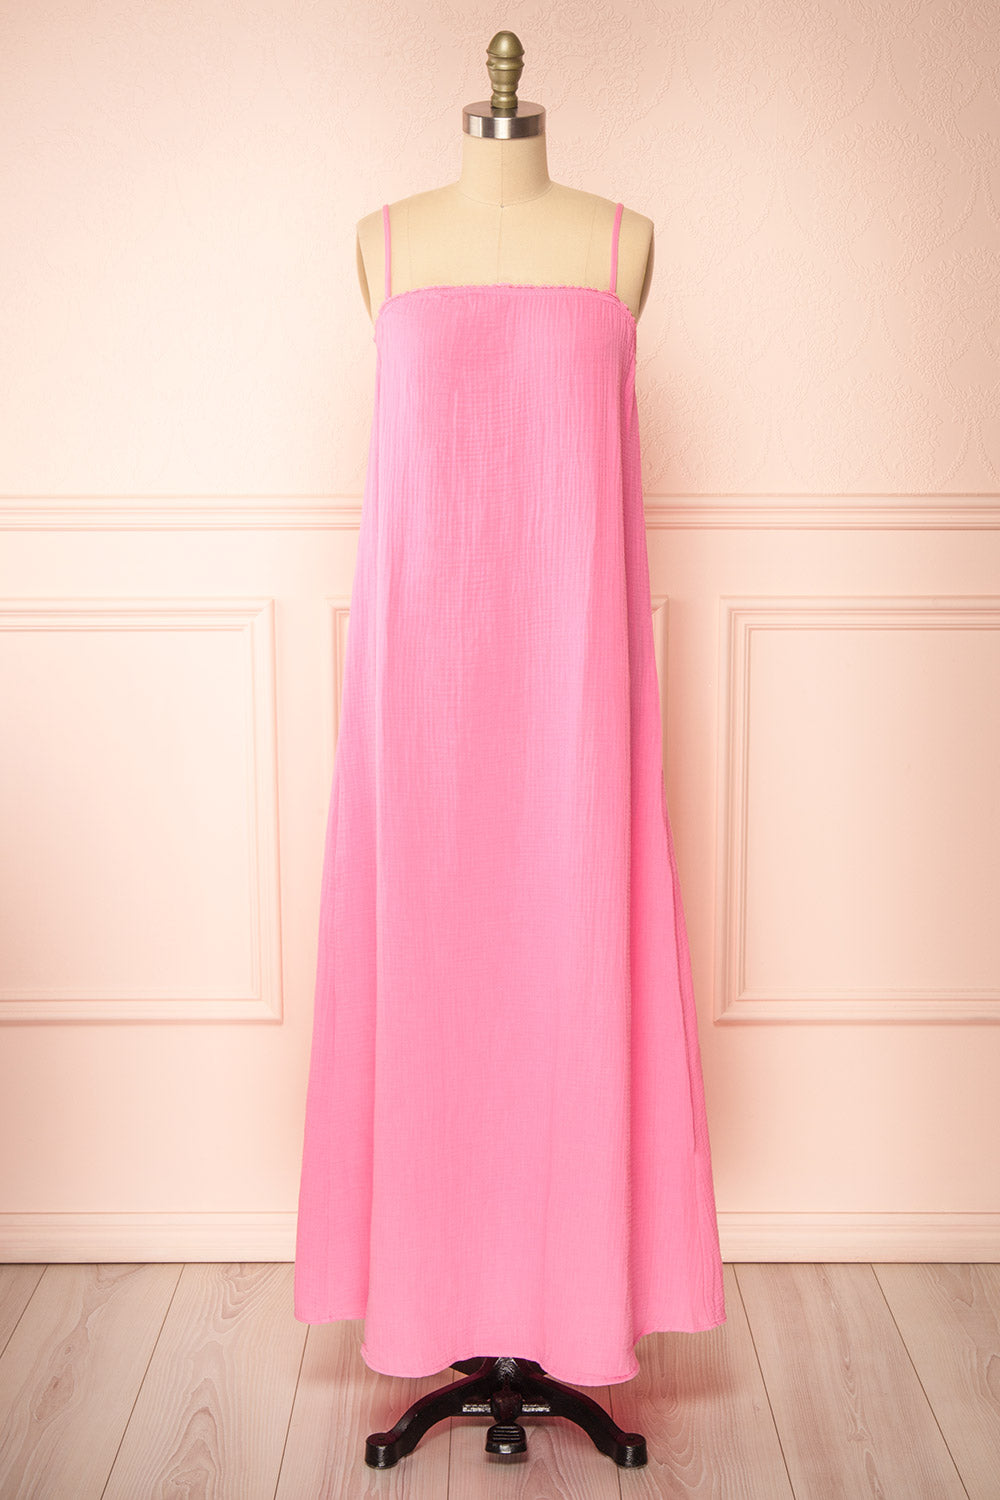 Marinet Pink Long Loose-Fitted Dress | Boutique 1861 front view